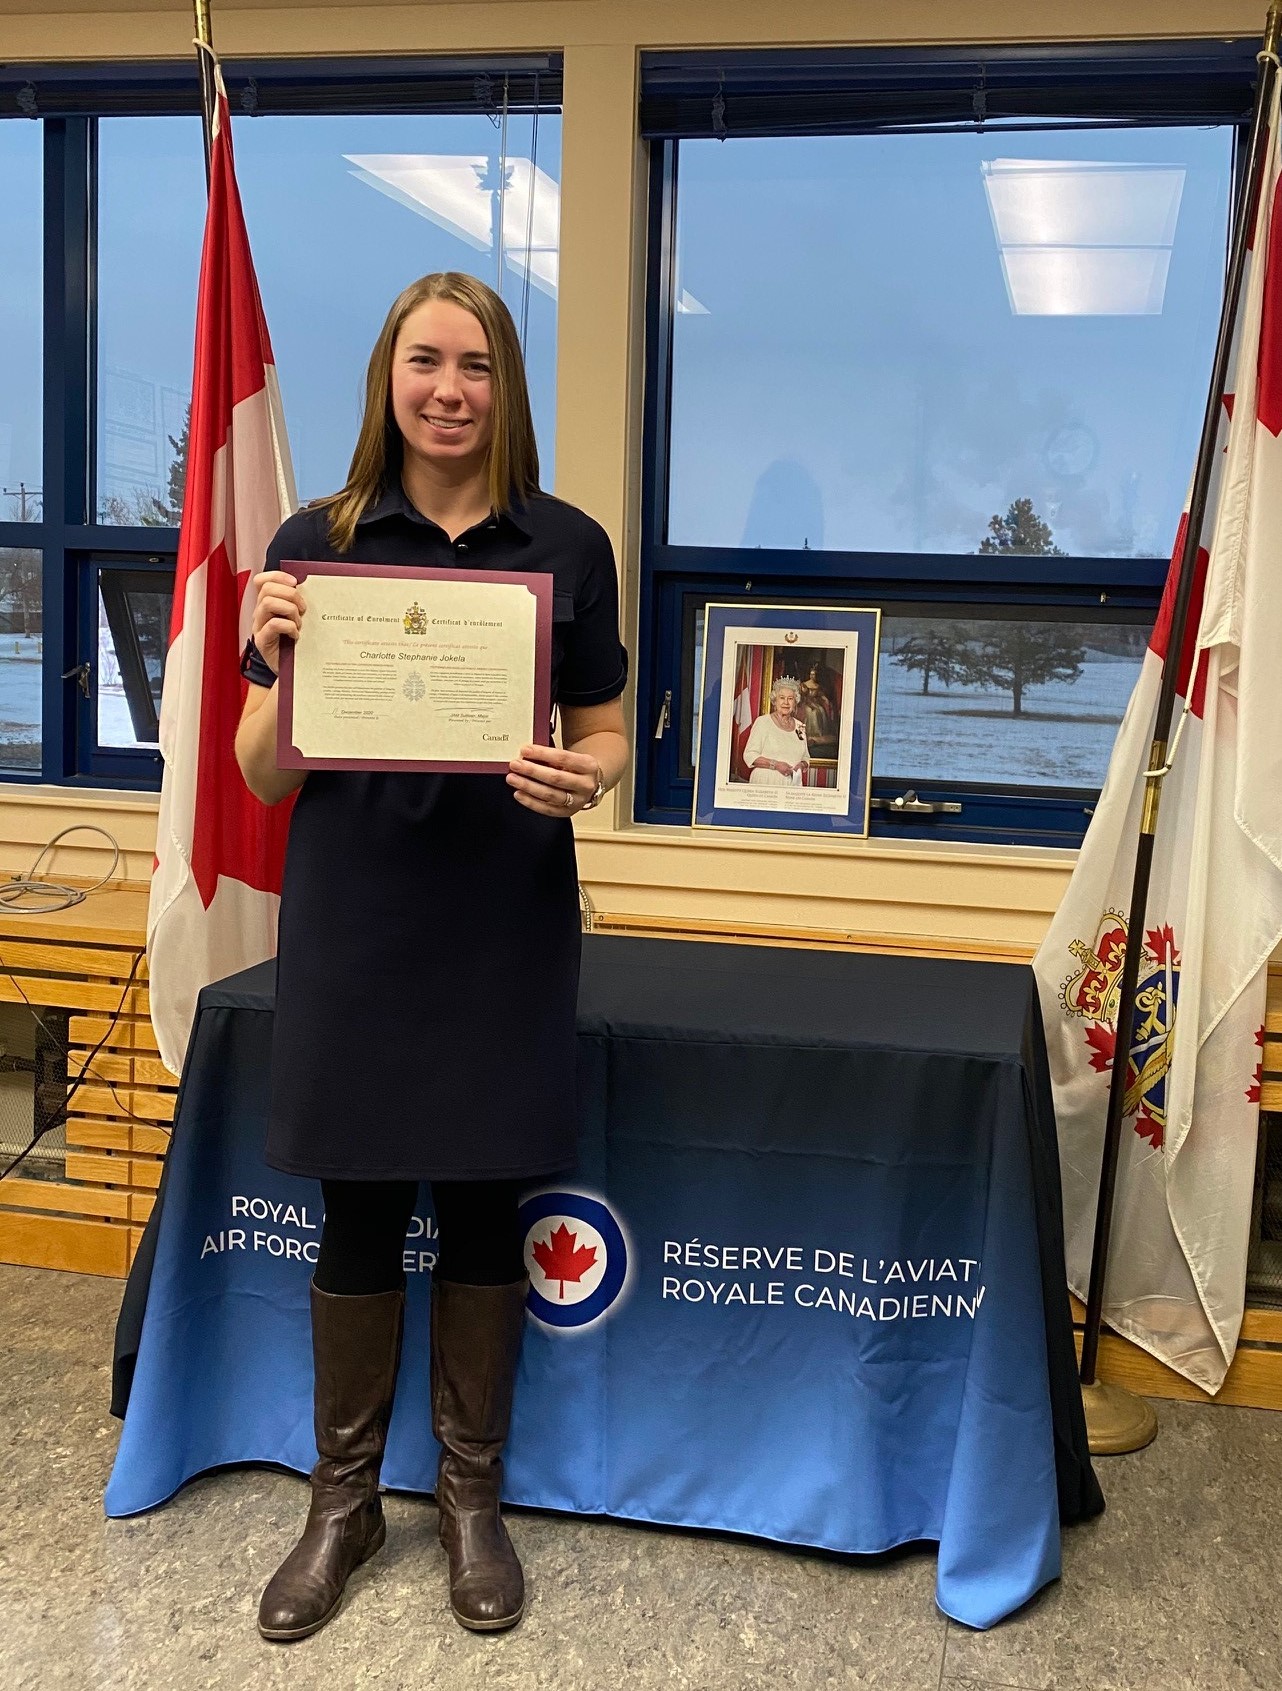 Officer Cadet Charlotte Jokela enrolled into the RCAF Reserve and after successfully completing her Basic Military Officer Qualification Course will go on to Logistics Officer training in Borden, Ontario.
Photo: Master Warrant Officer Patricia Schwindt, 4 RCAF Reserve Flight.